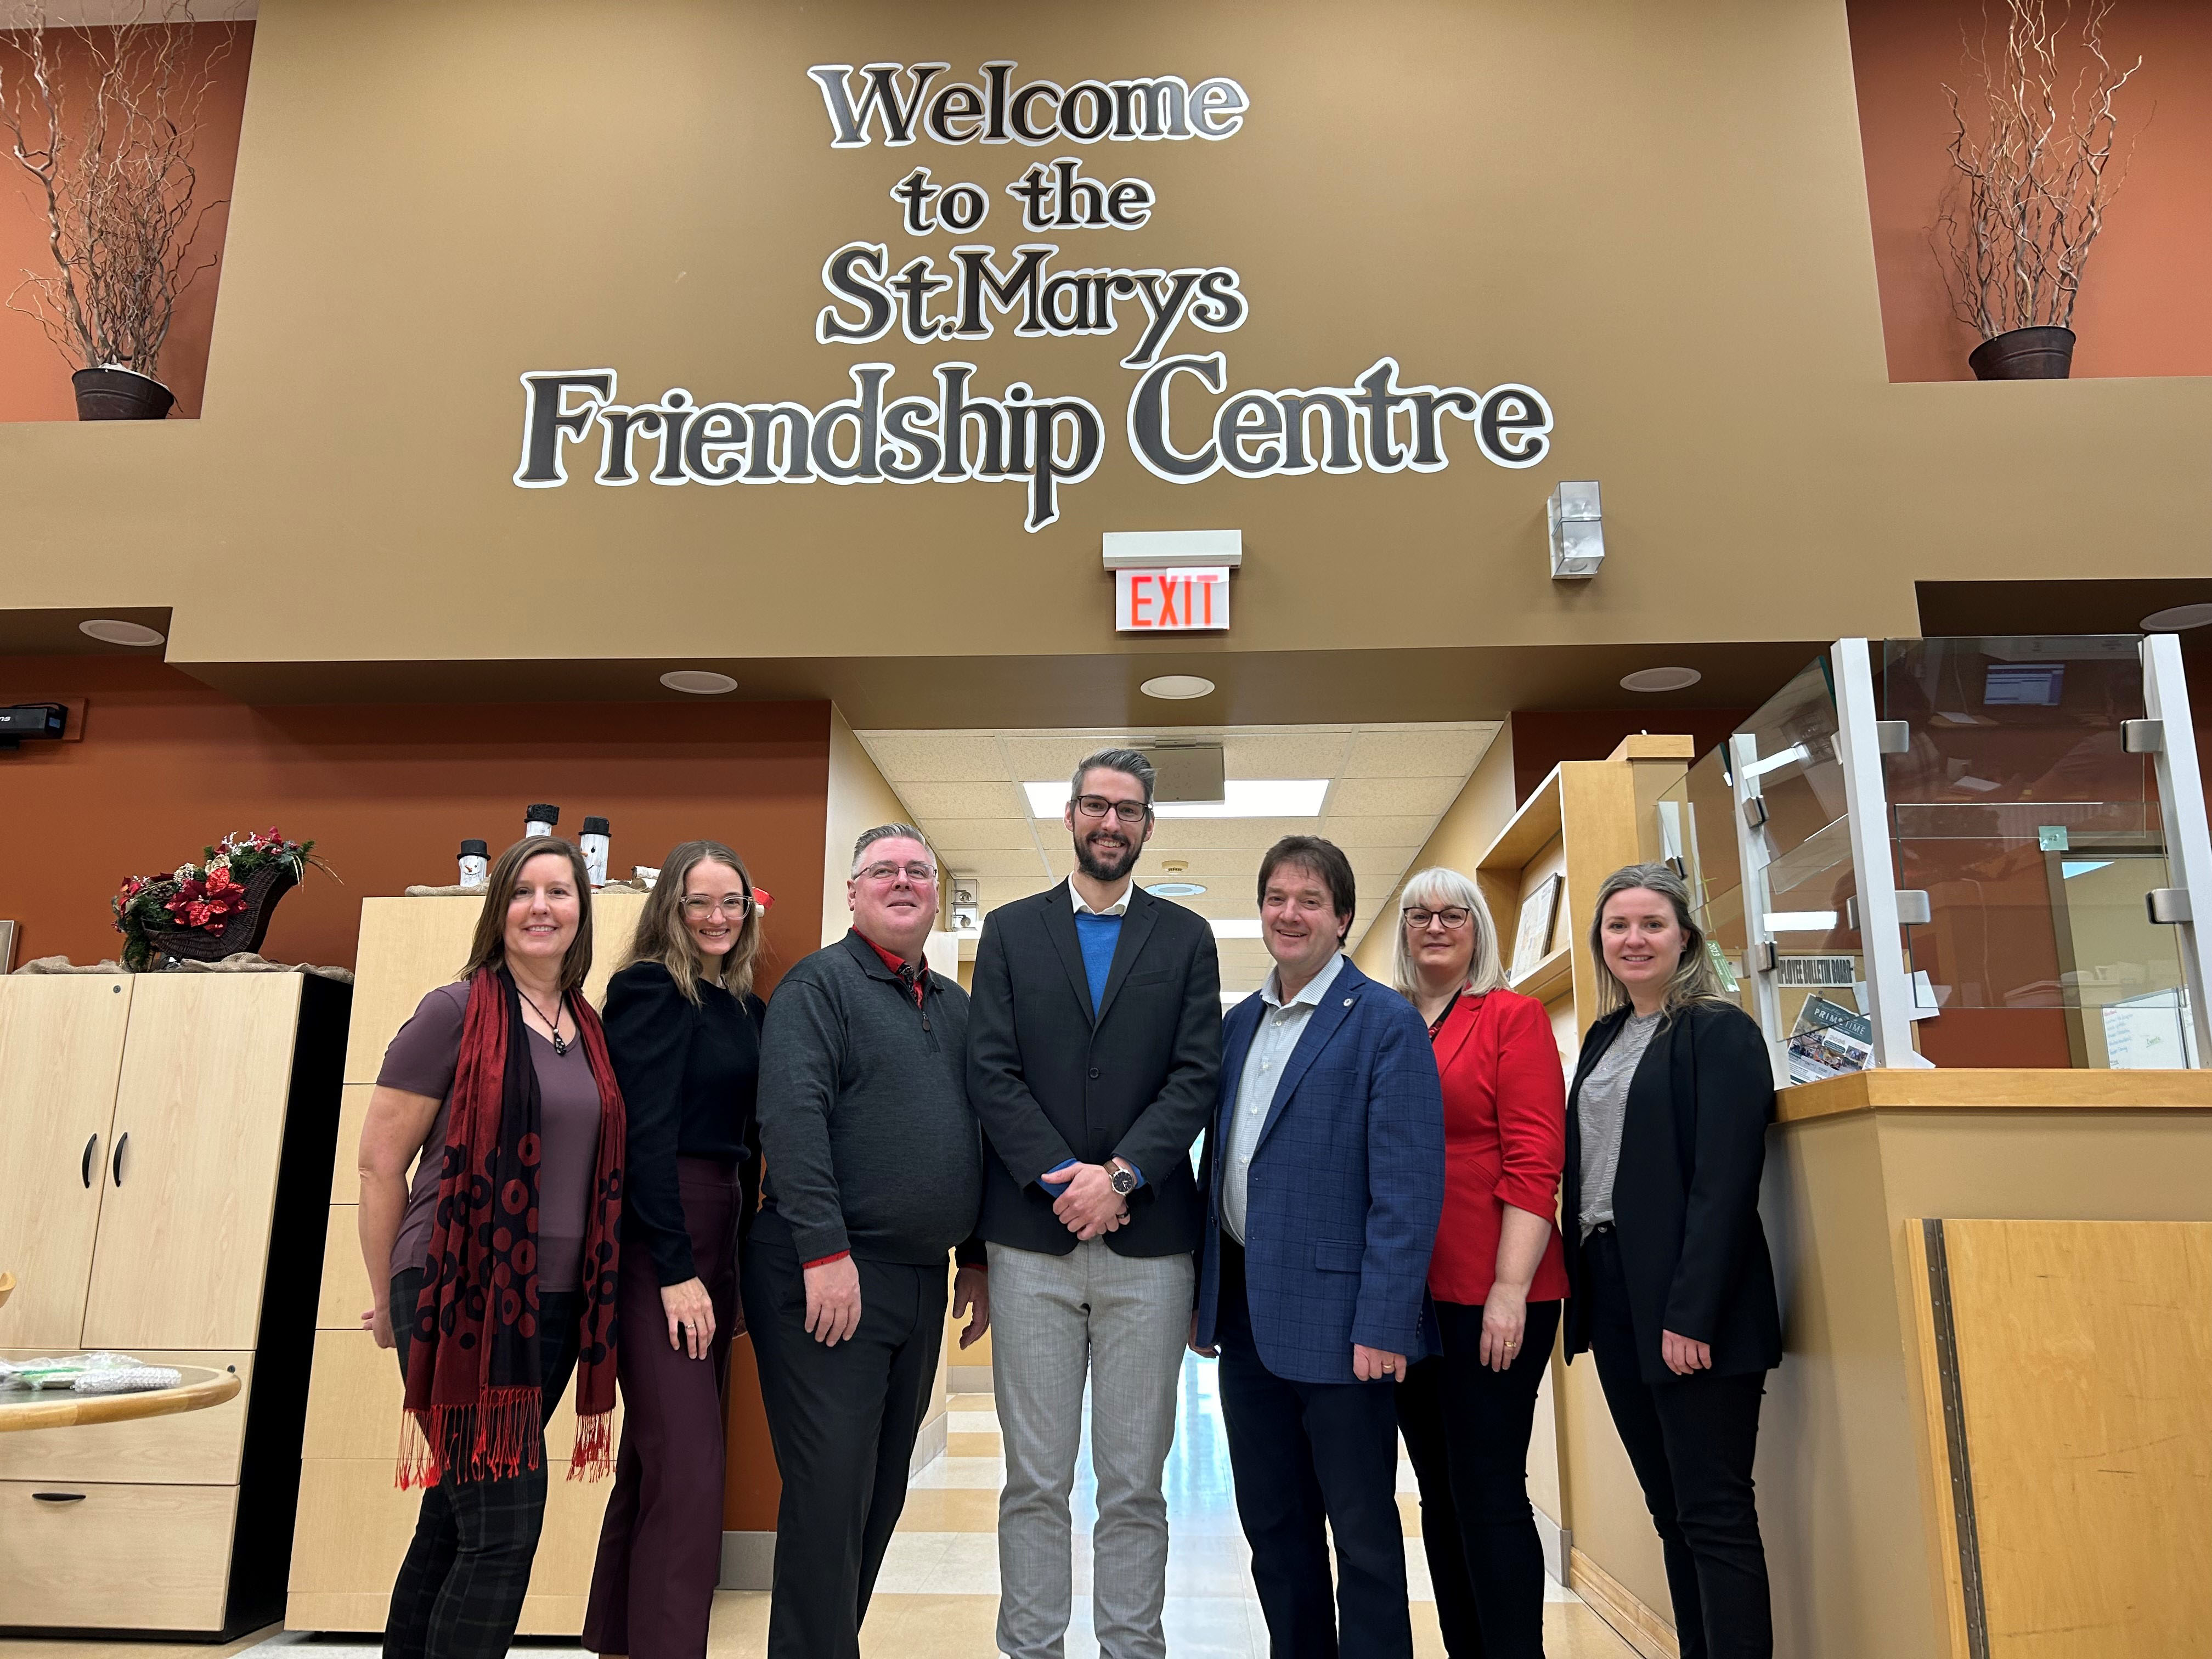 Perth-Wellington MPP Matthew Rae joined St. Marys Mayor Al Strathdee, Deputy Mayor Fern Pridham, Ontario Trillium Foundation Volunteer Bob Parker and Town staff to celebrate the upcoming installation of a new HVAC system at the St. Marys Friendship Centre. 